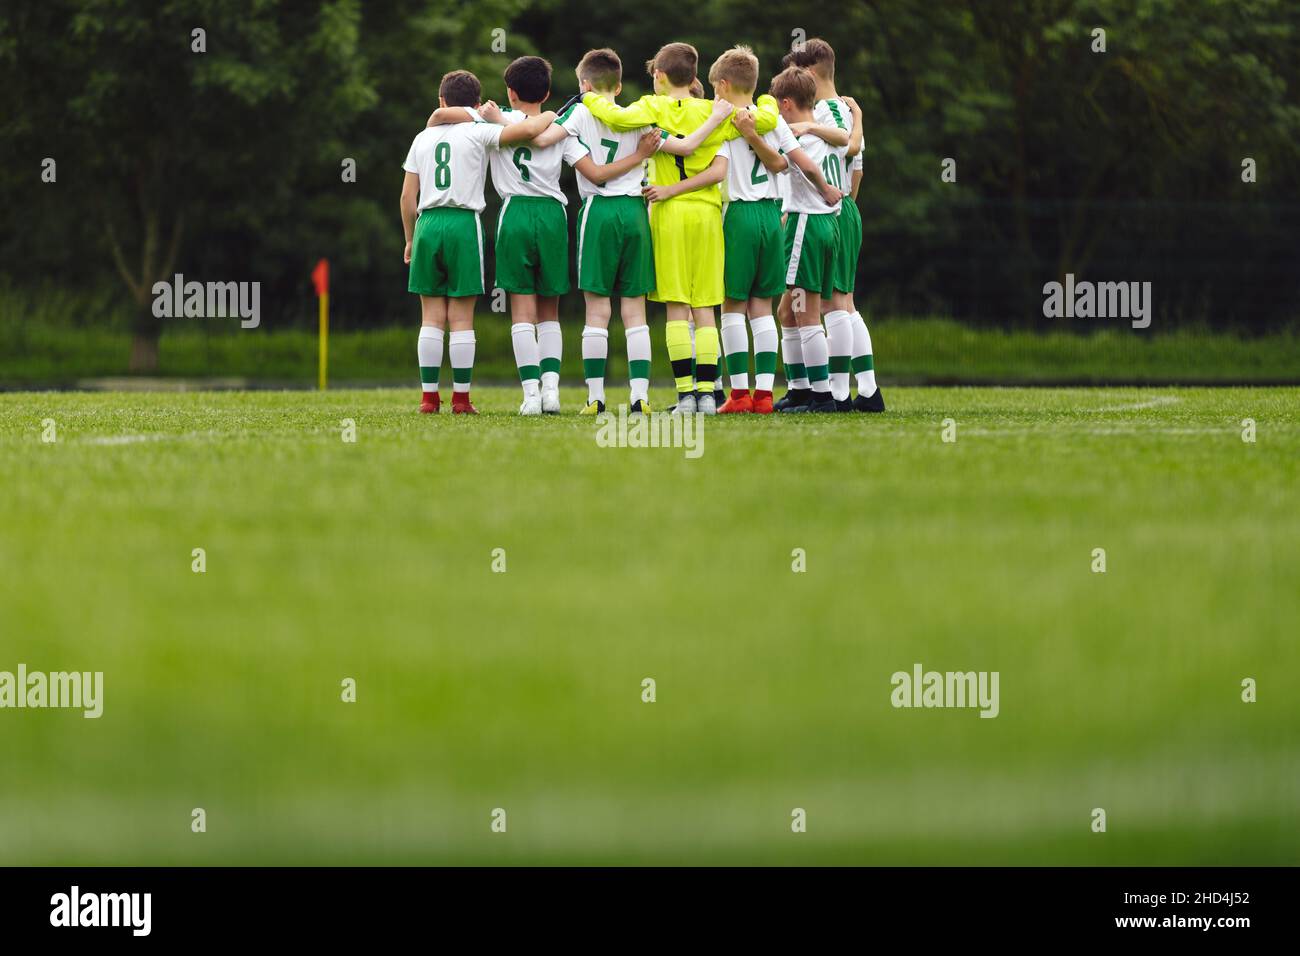 Soccer huddle. School boys standing together united in a team. Elementart age kids in sport team standing in circle on grass field Stock Photo